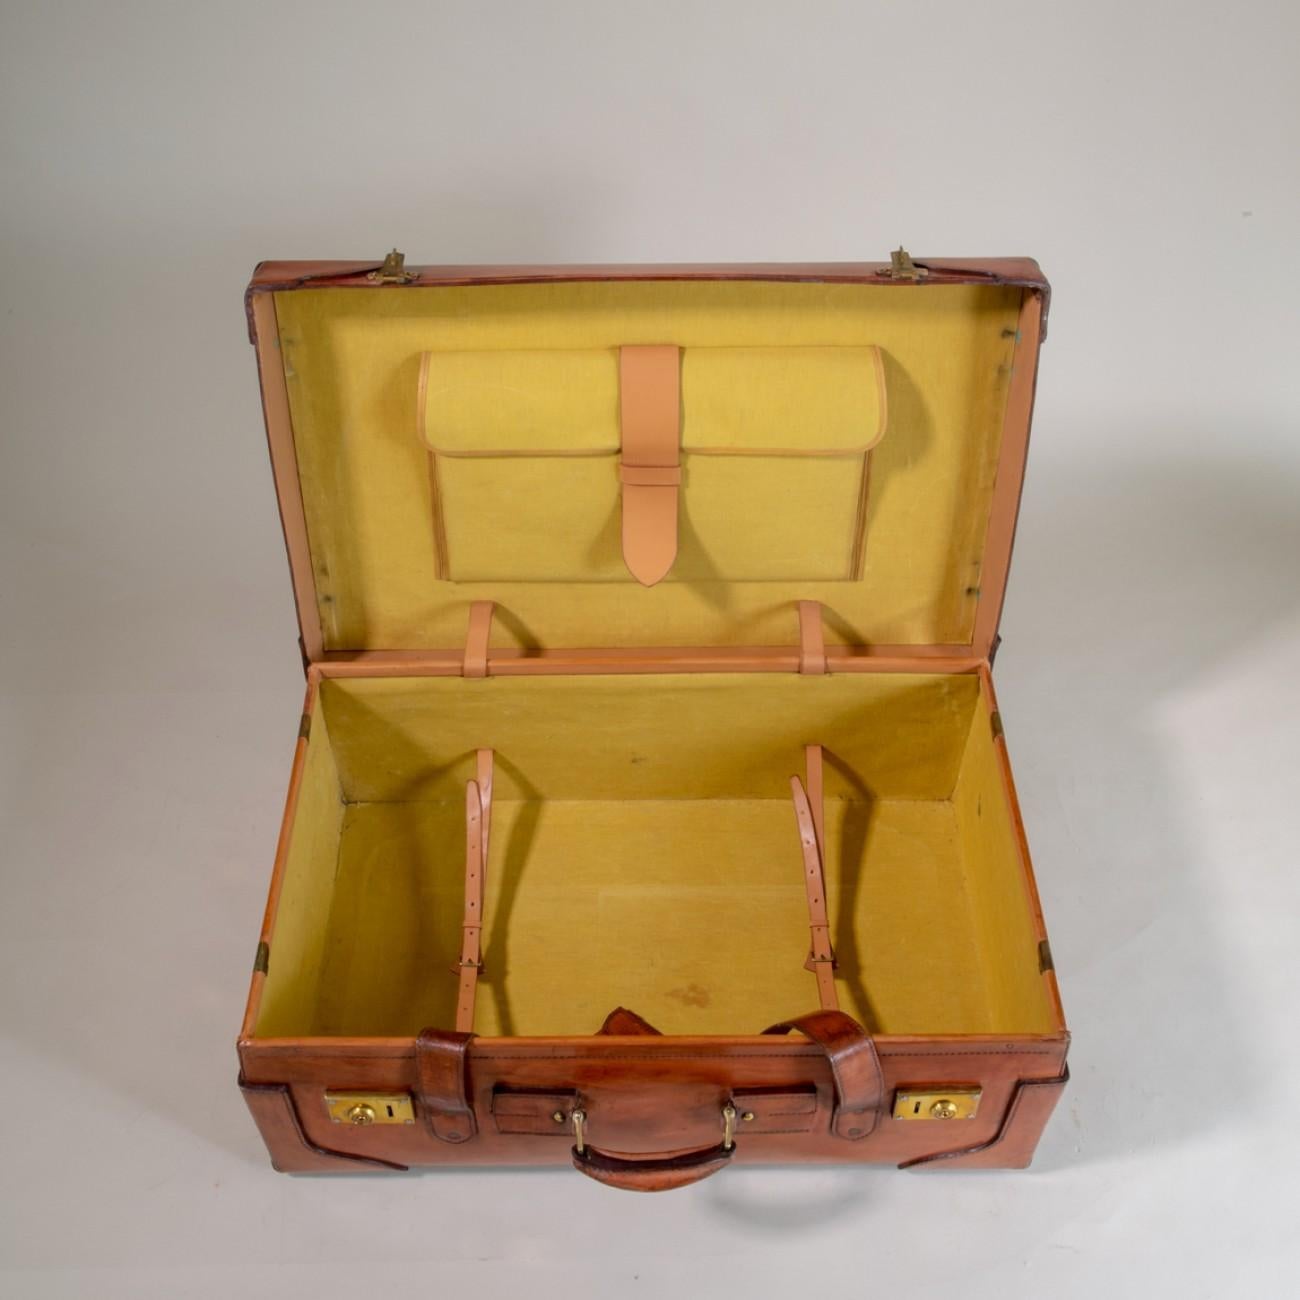 Brass Large Tan Leather Suitcase with Straps and Tray, circa 1930